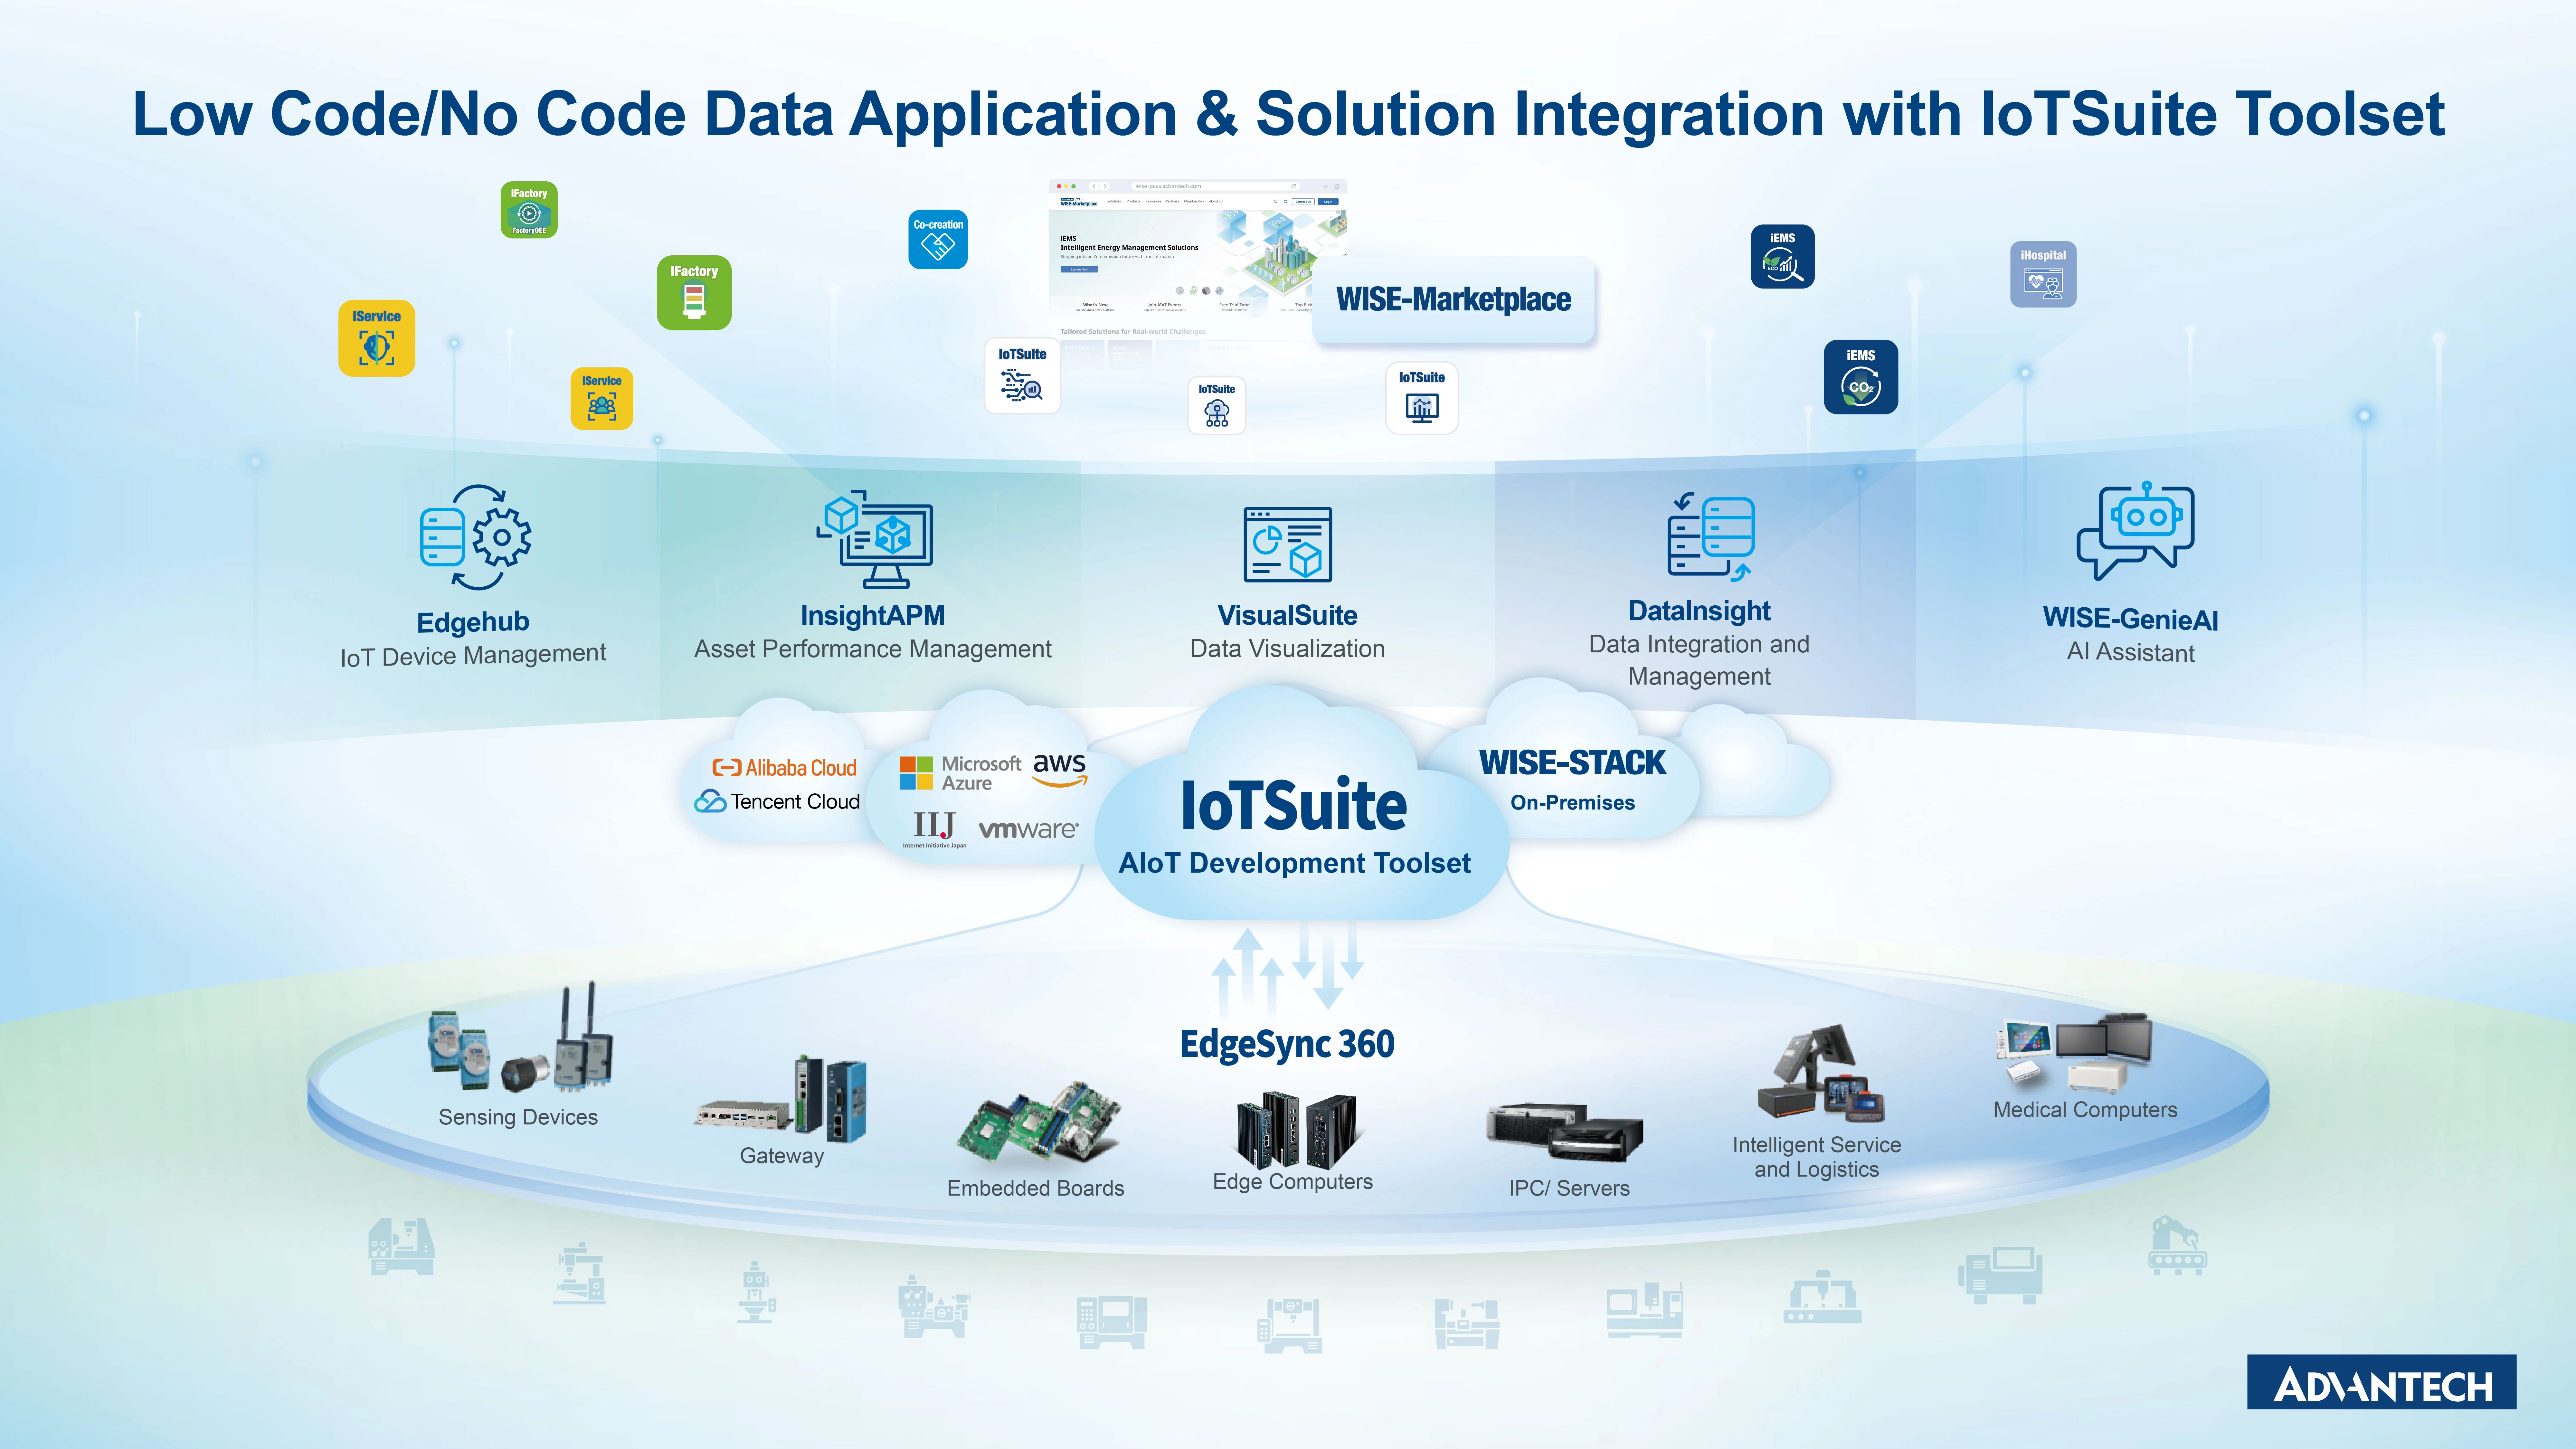 Architecture for Data Application and Solution Integration